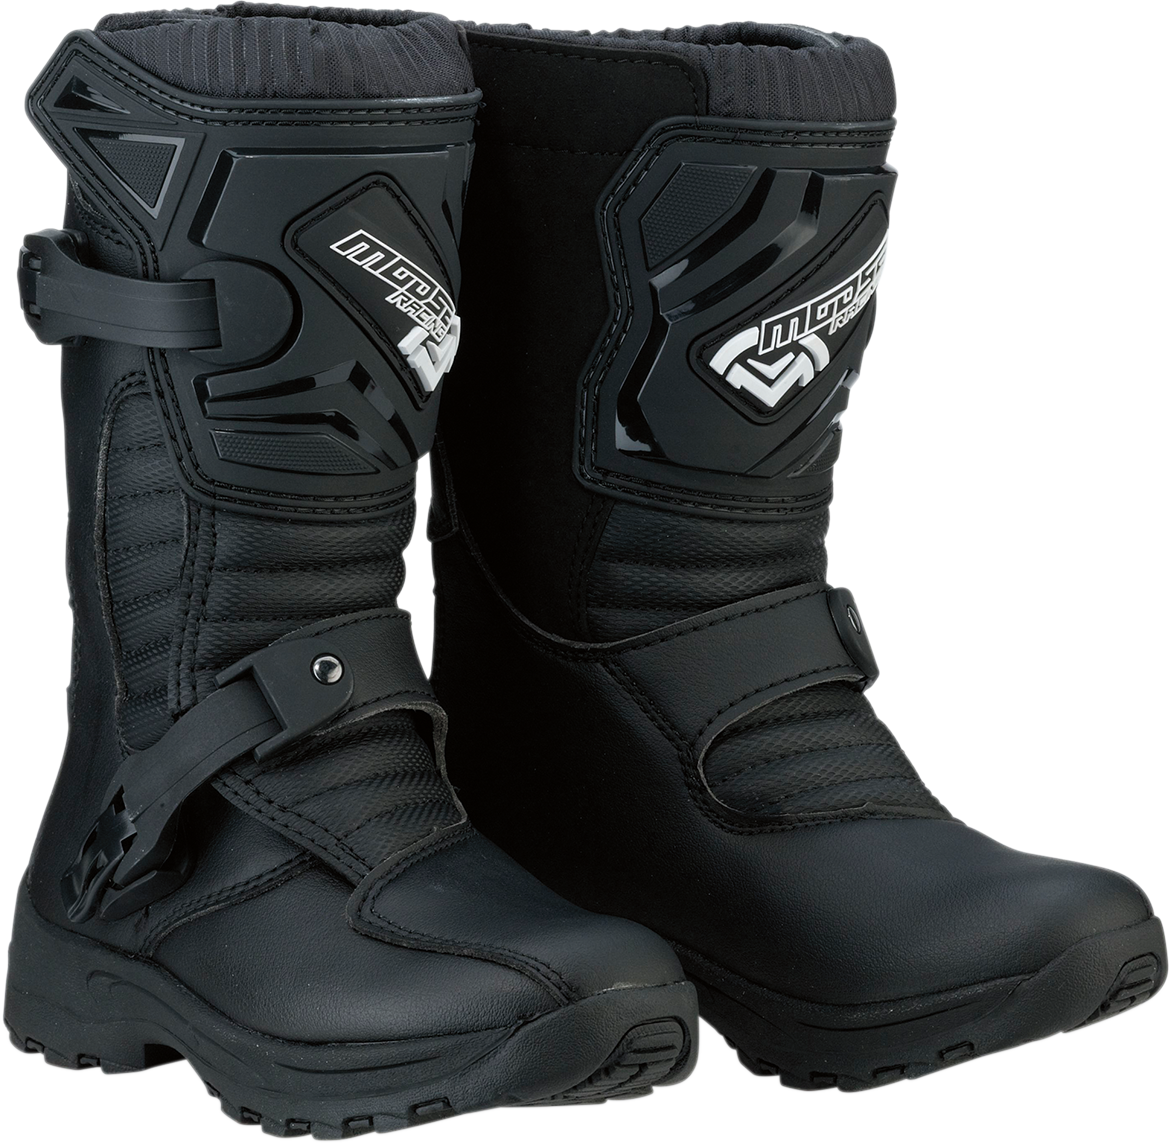 MOOSE RACING M1.3 Boots - Black - Size 10 3411-0465